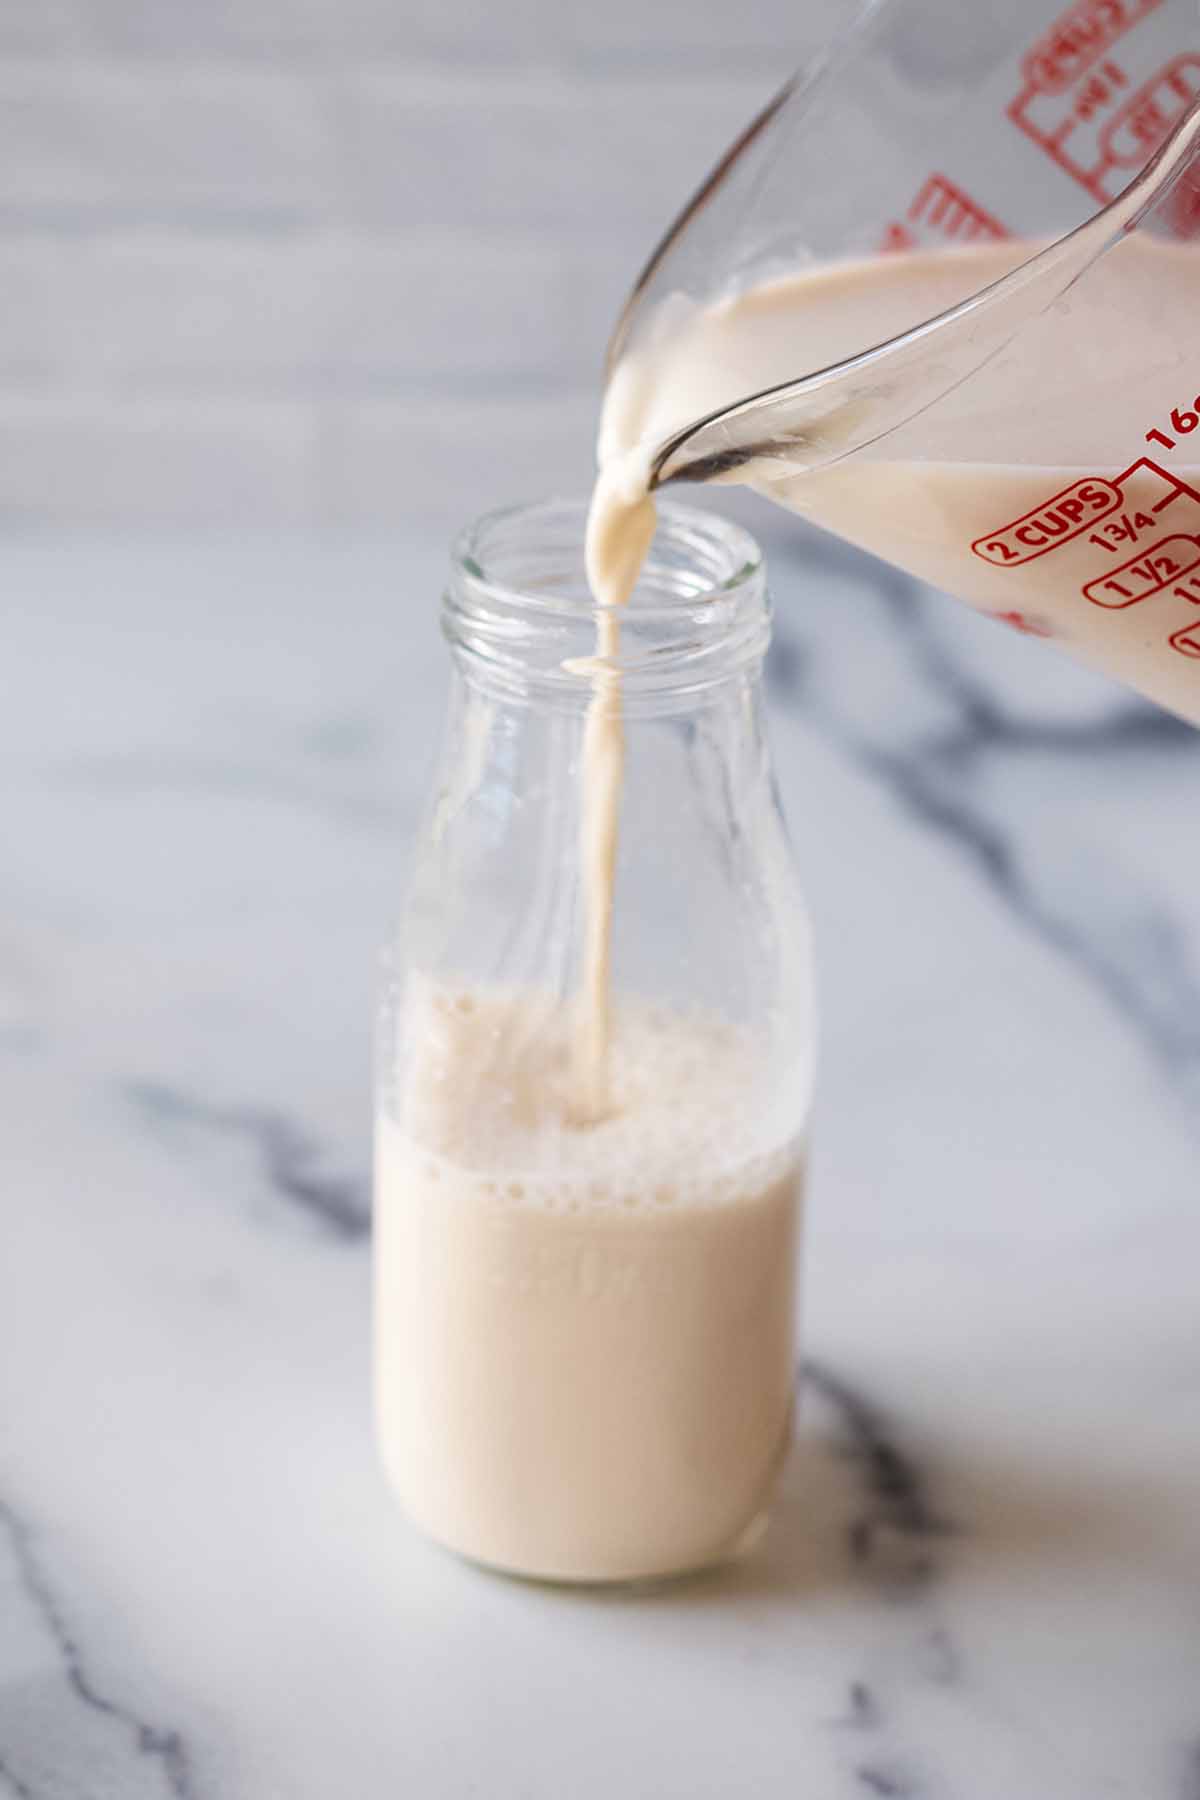 Walnut milk being poured into a small milk bottle